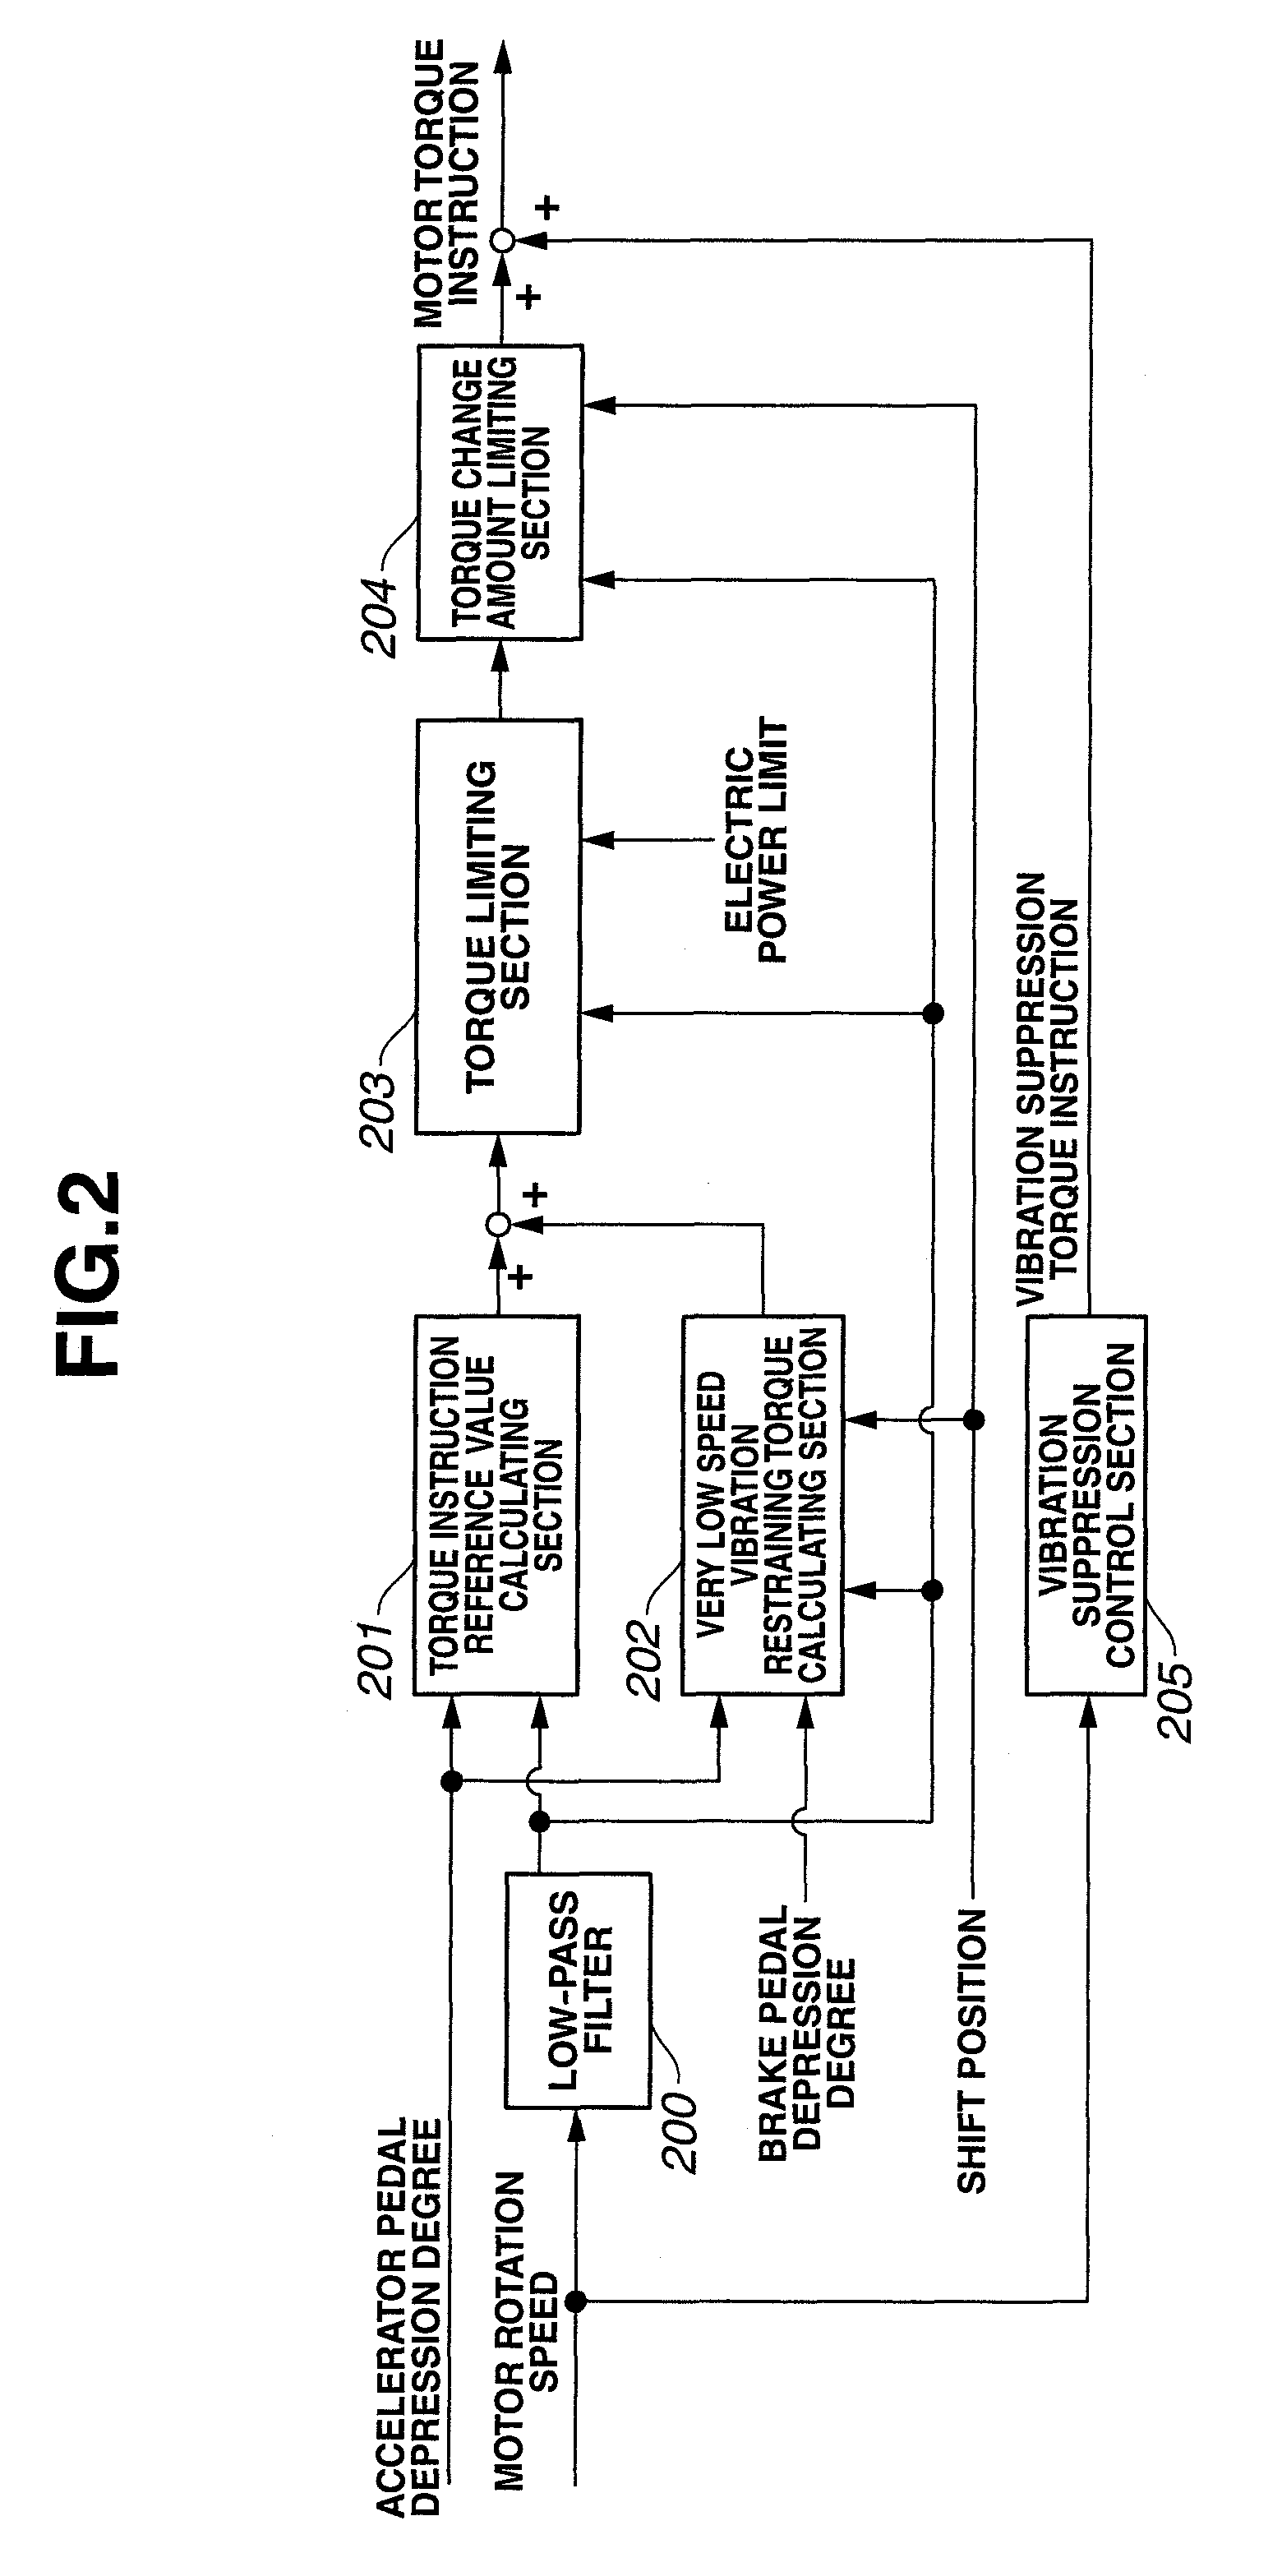 Torque control system for suppressing vibration in an electric vehicle